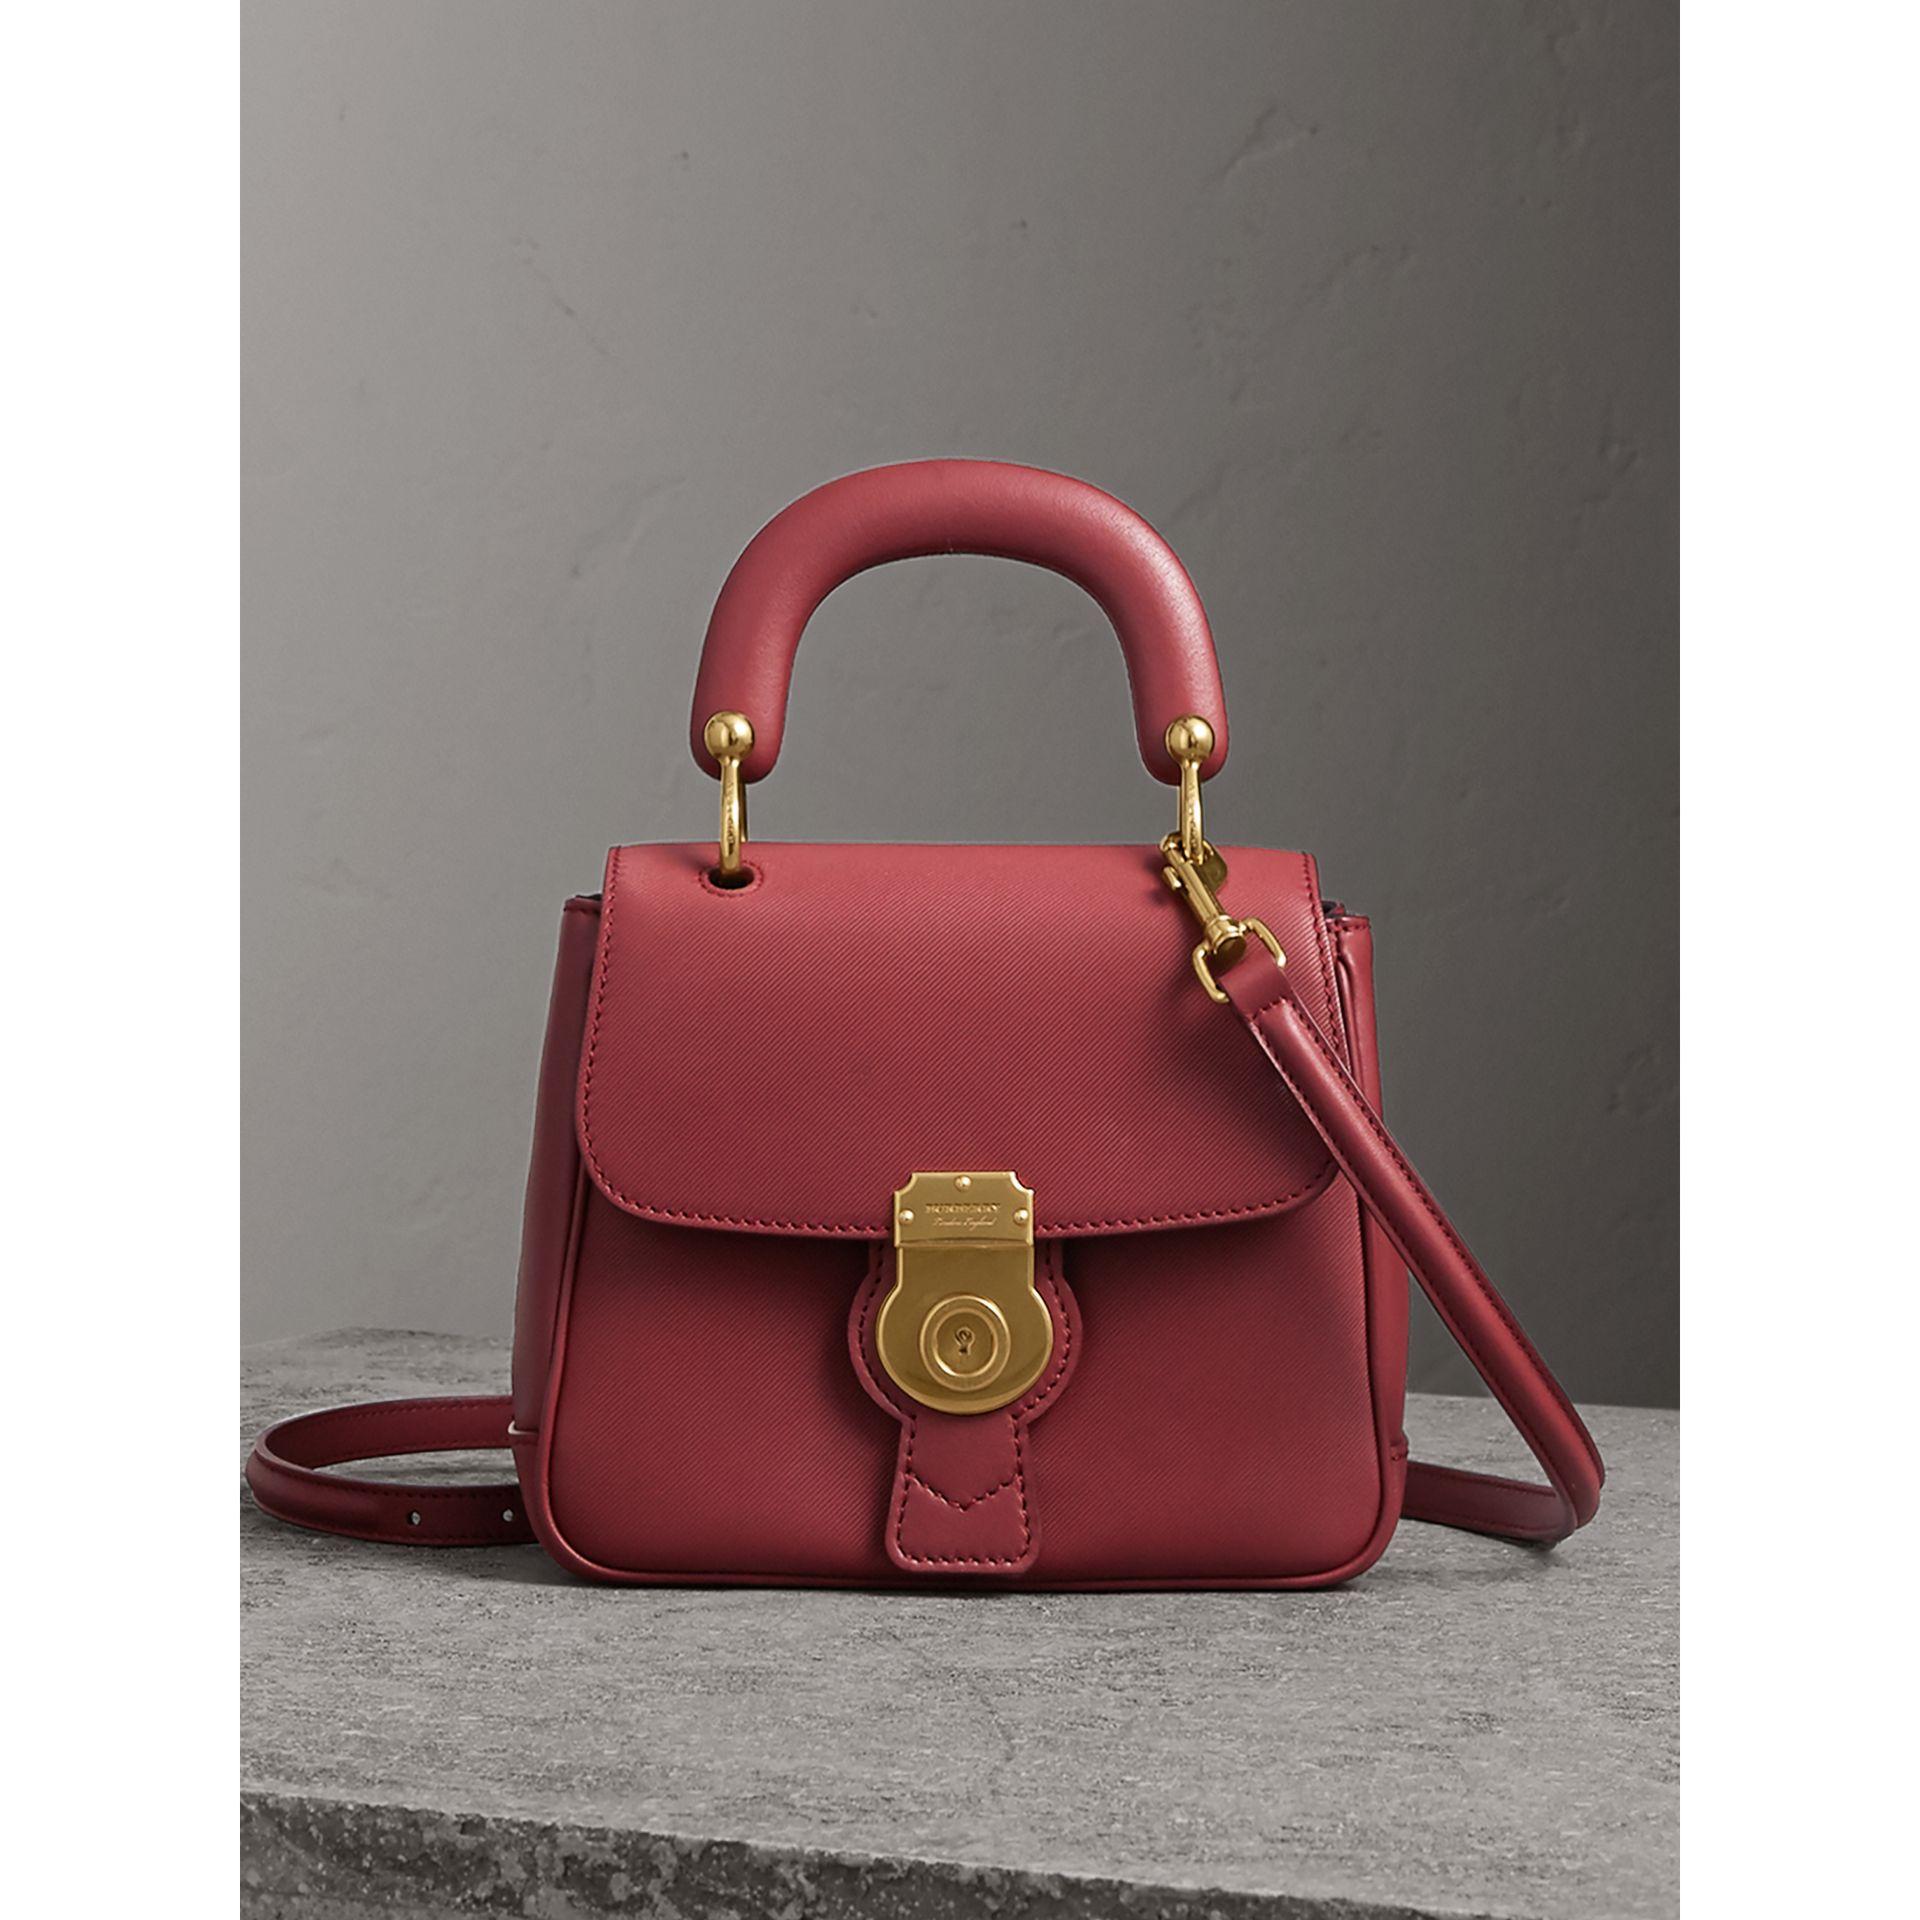 Burberry The Small Dk88 Top Handle Bag In Antique Red | ModeSens